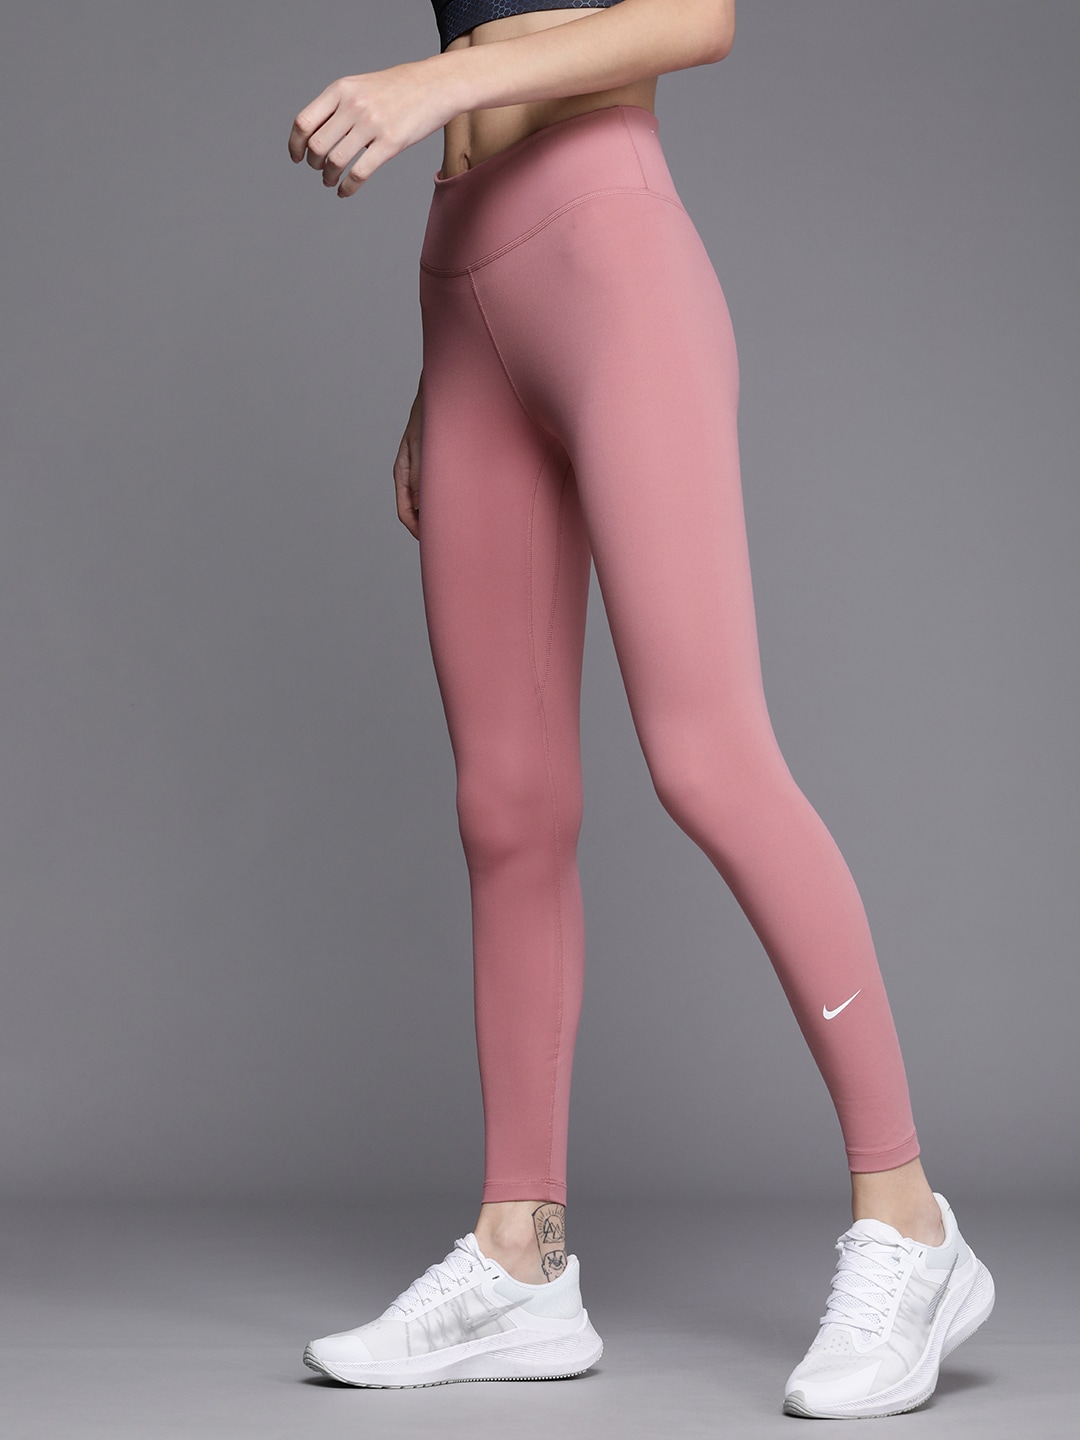 Nike Women Pink Solid Dri-FIT One Mid-Rise Training Tights Price in India